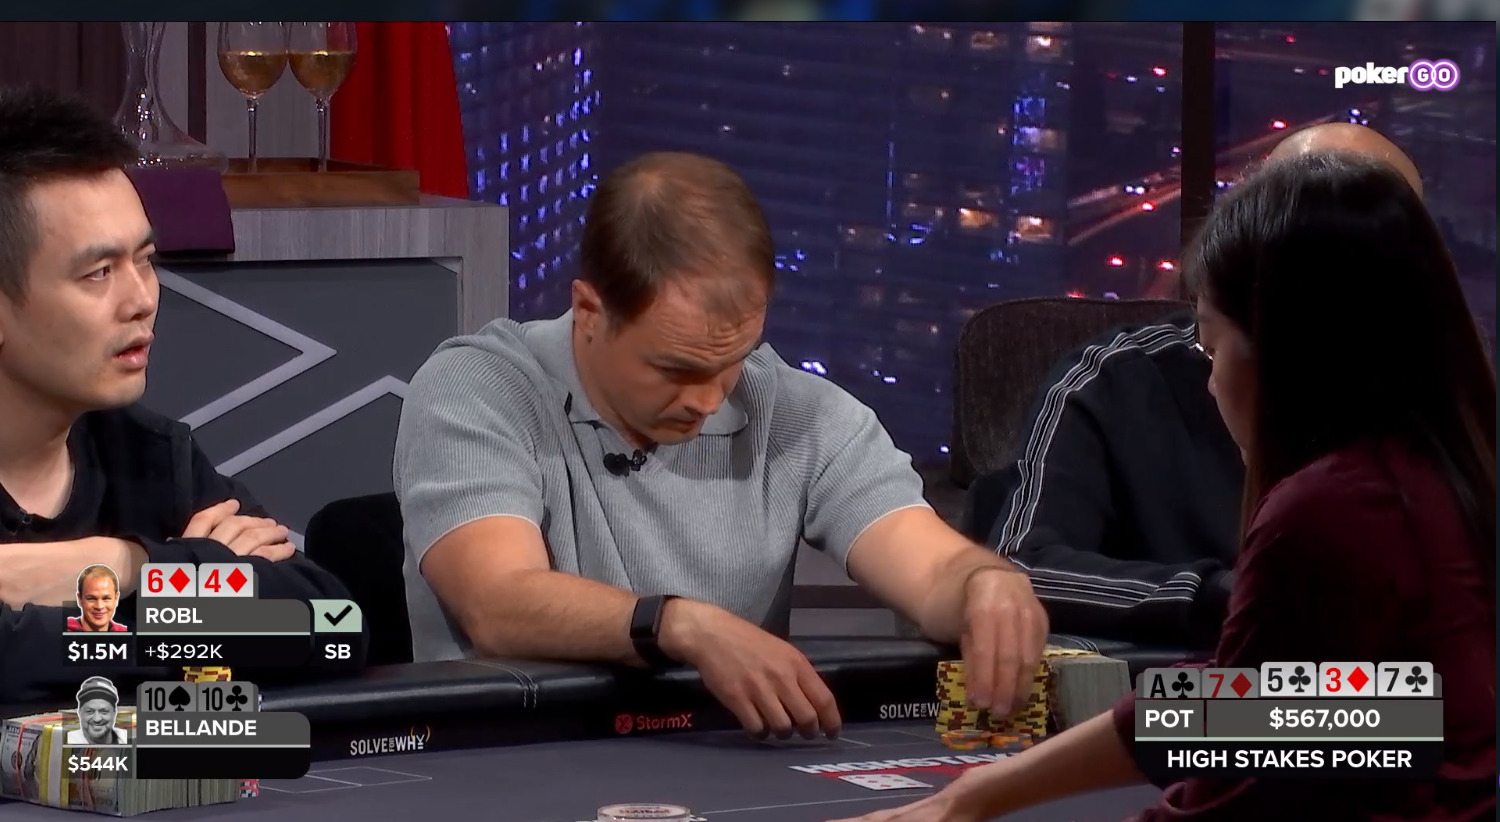 High Stakes Poker Season 11 Episode 1 Highlights - Andrew Robl Wins A Huge $567,000 Pot